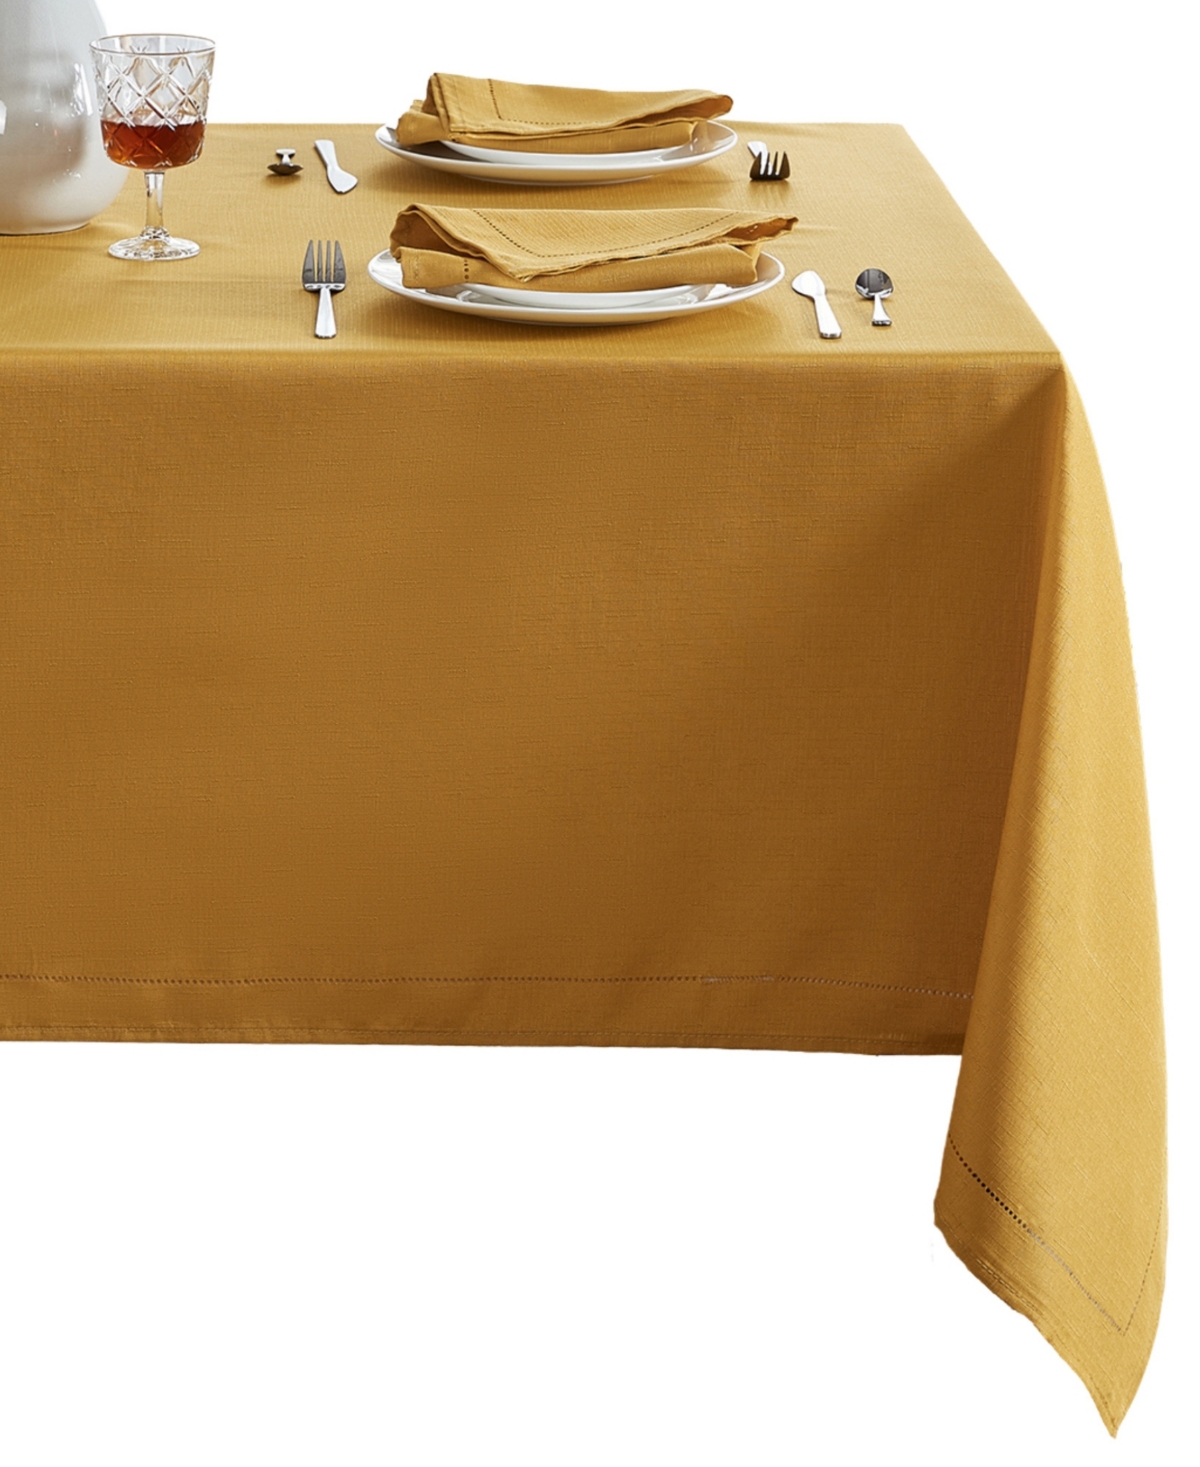 Elrene Alison Eyelet Punched Border Fabric Tablecloth, 60" X 102" In Golden Yellow